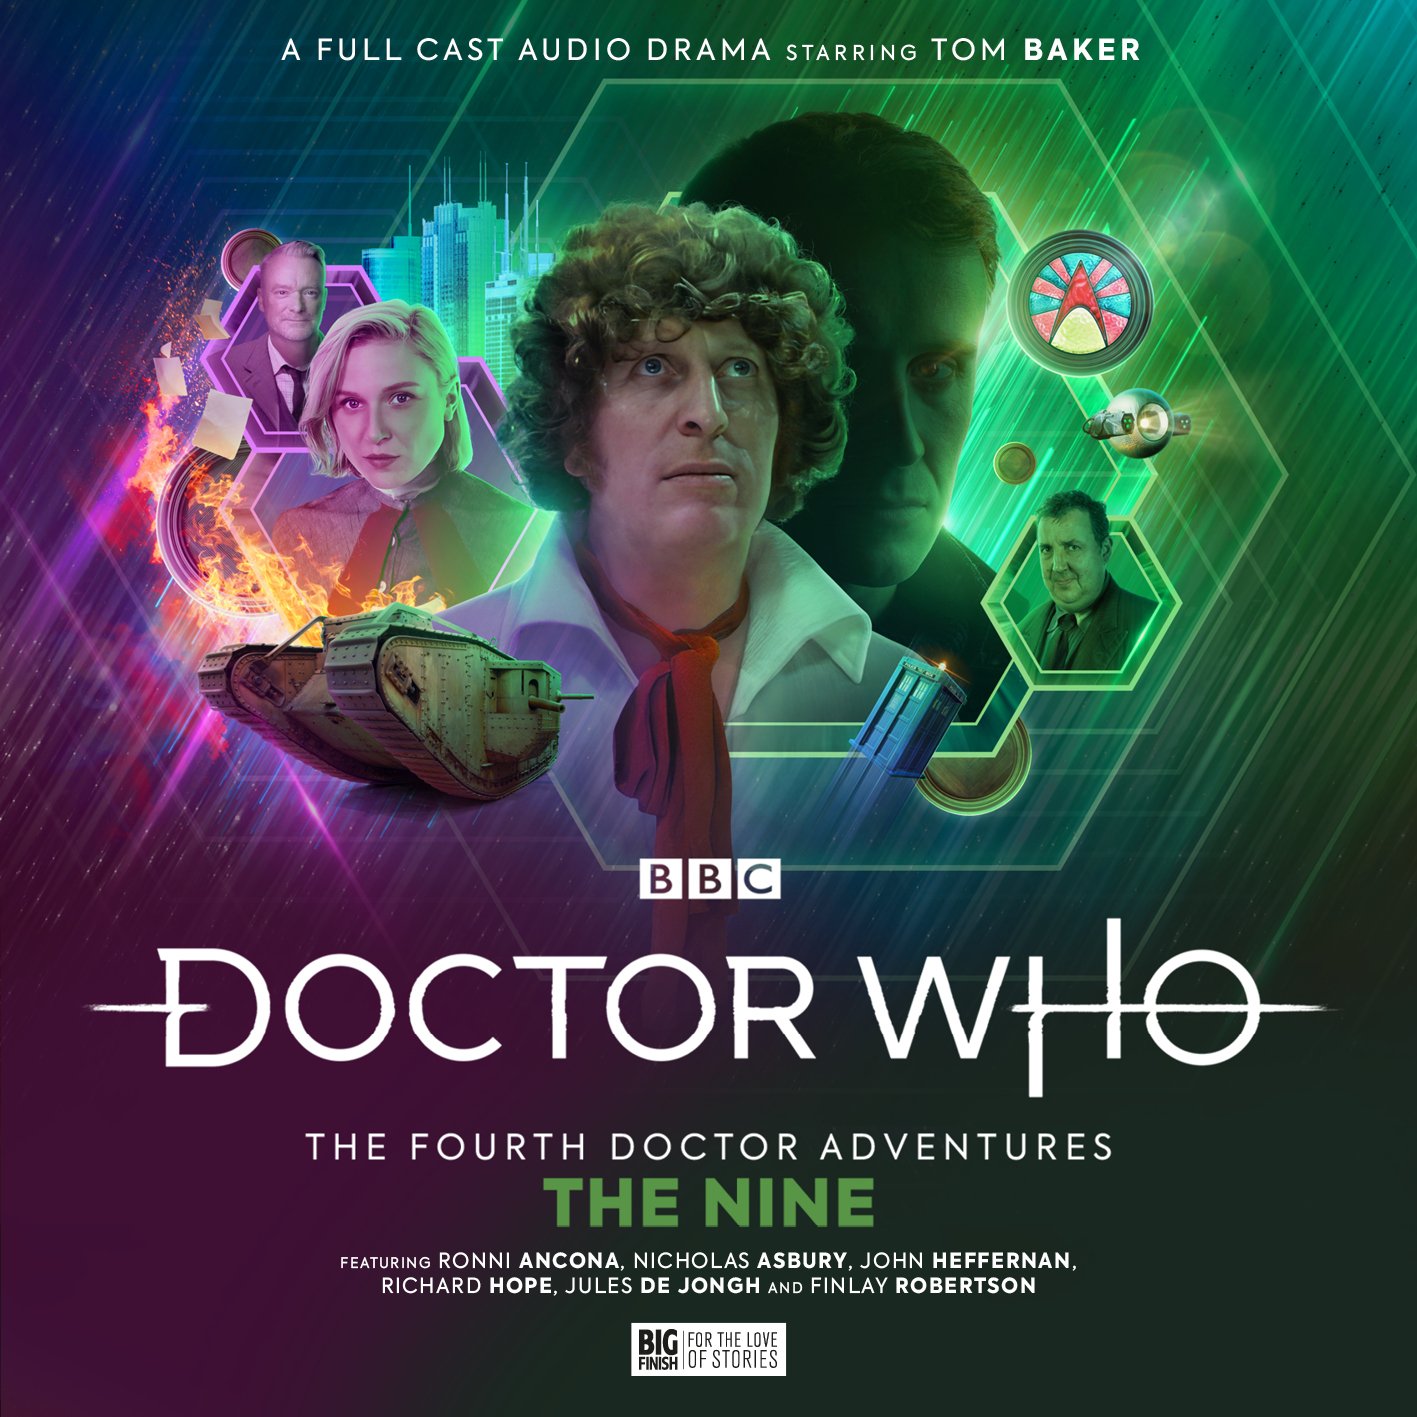 Out Now: Tom Baker’s Fourth Doctor Returns to Big Finish to Battle The Nine